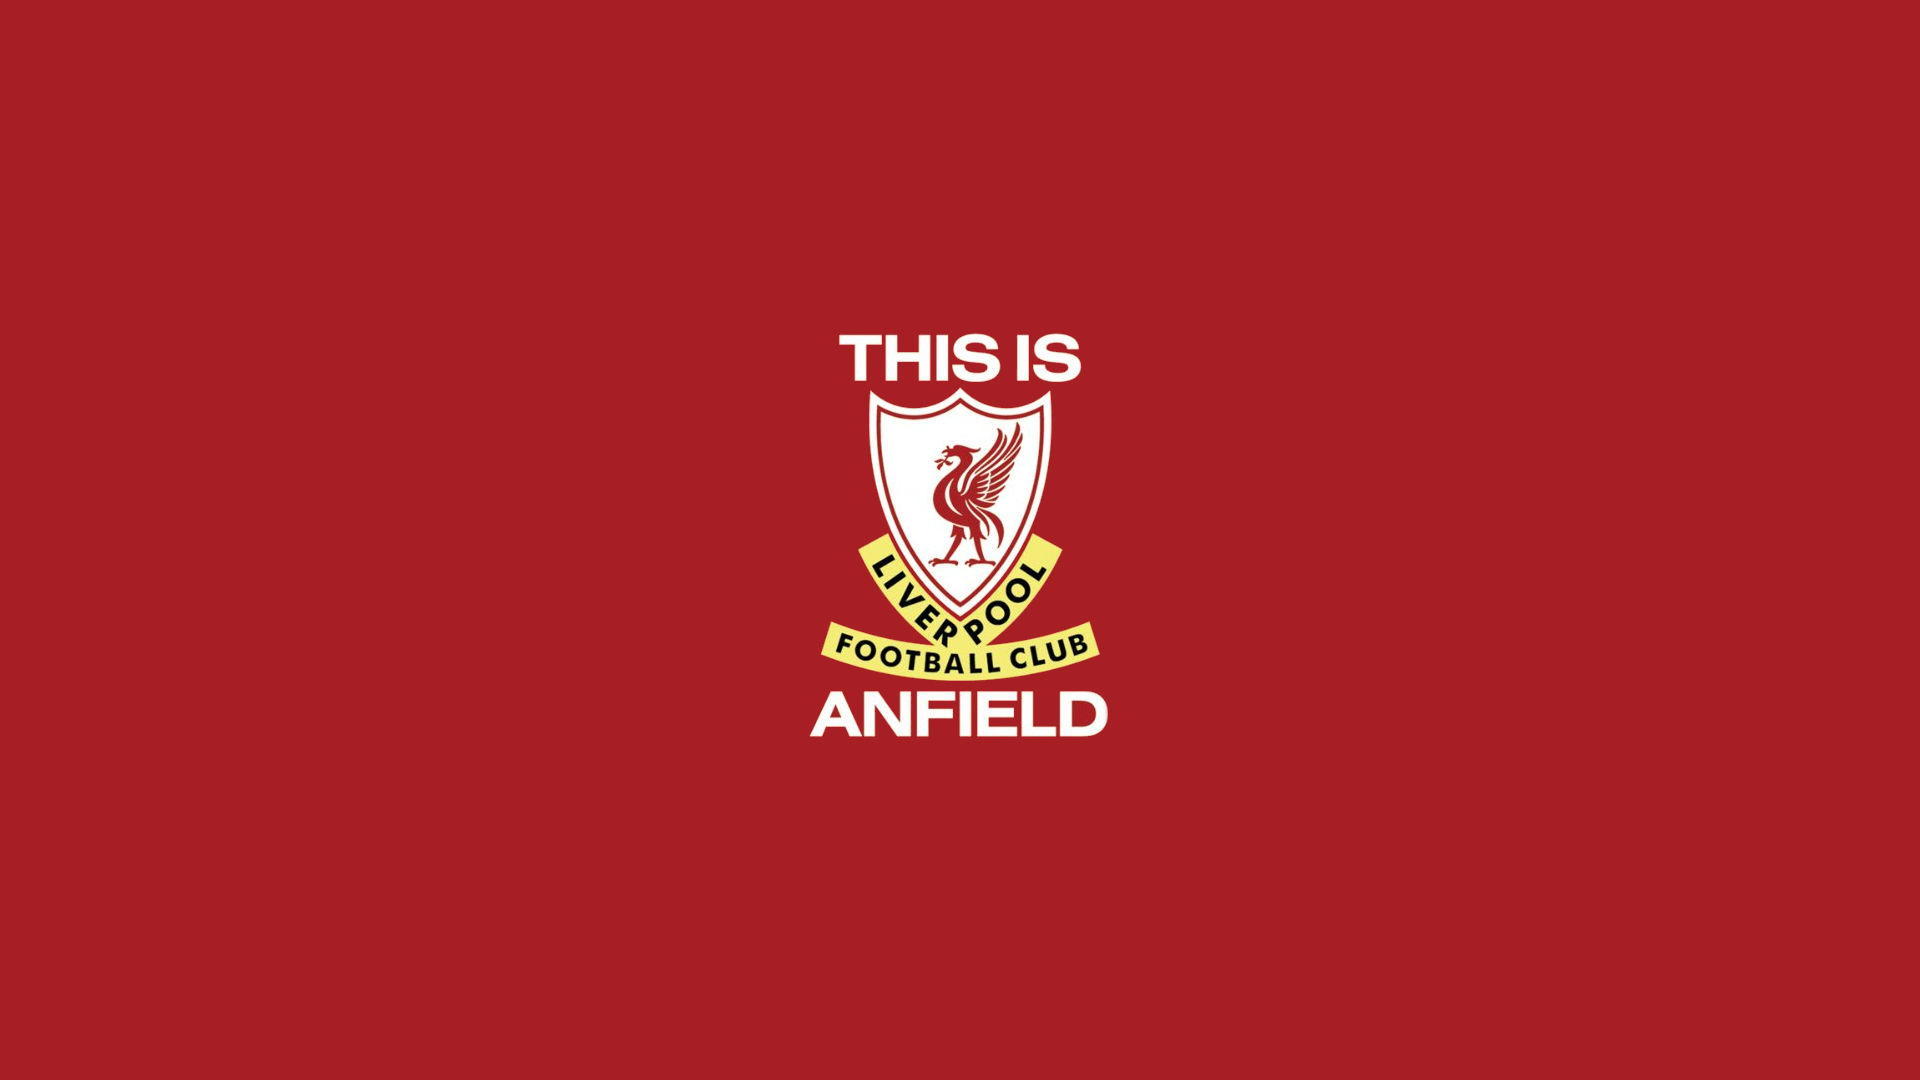 This Is Anfield Wallpaper Liverpoolfc